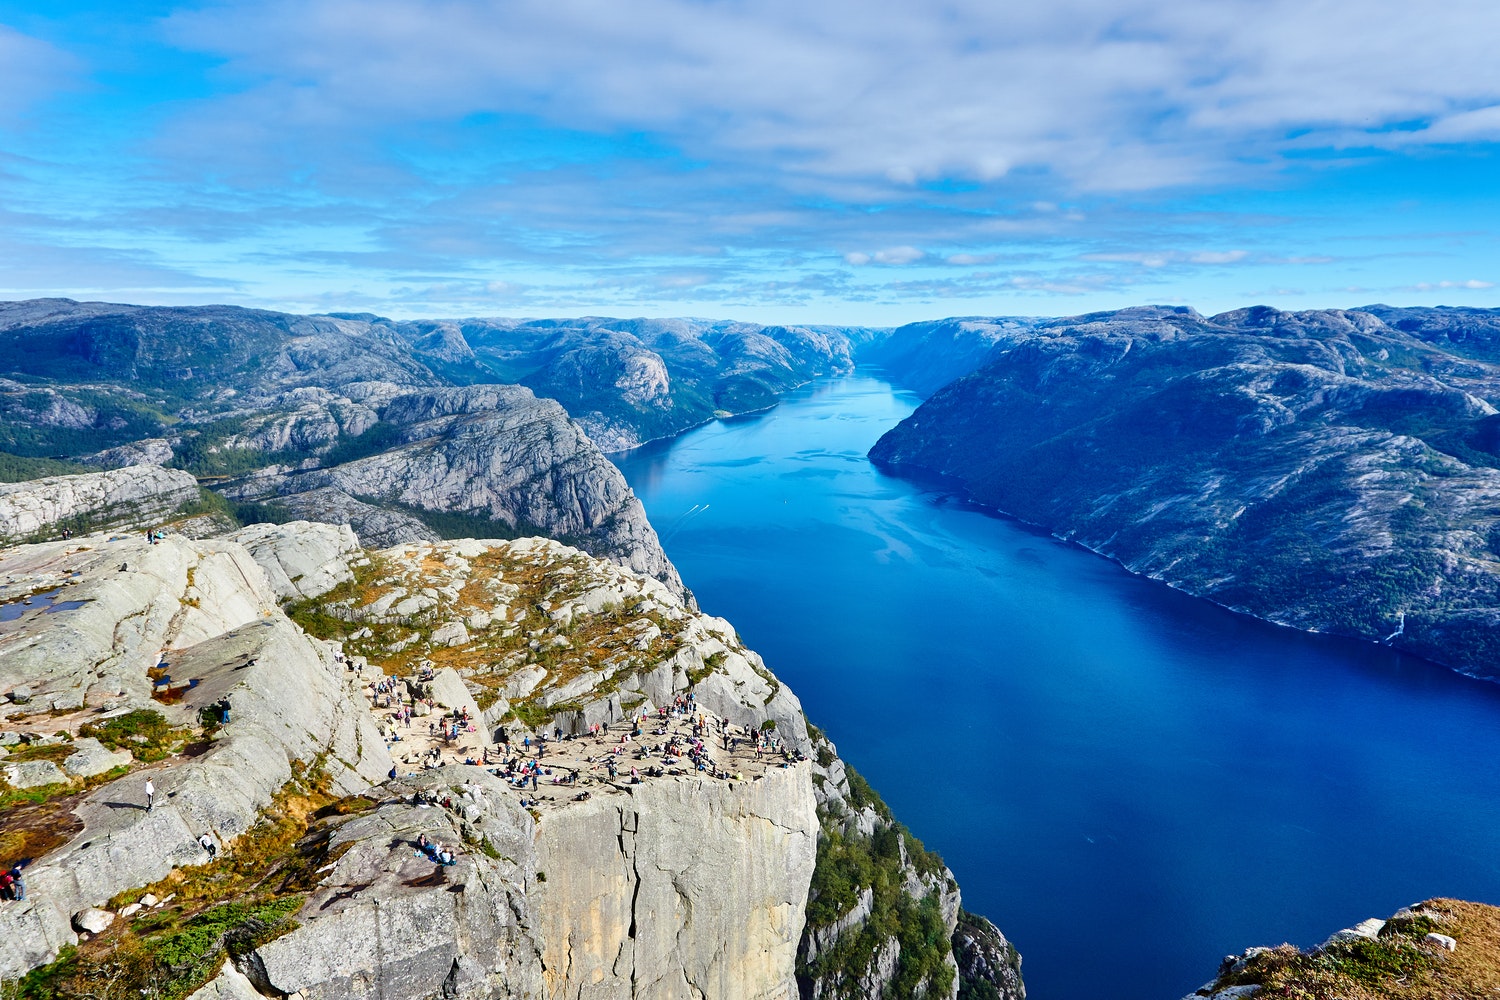 View of the Prekestolen cliff above the Lysefjord in Norway